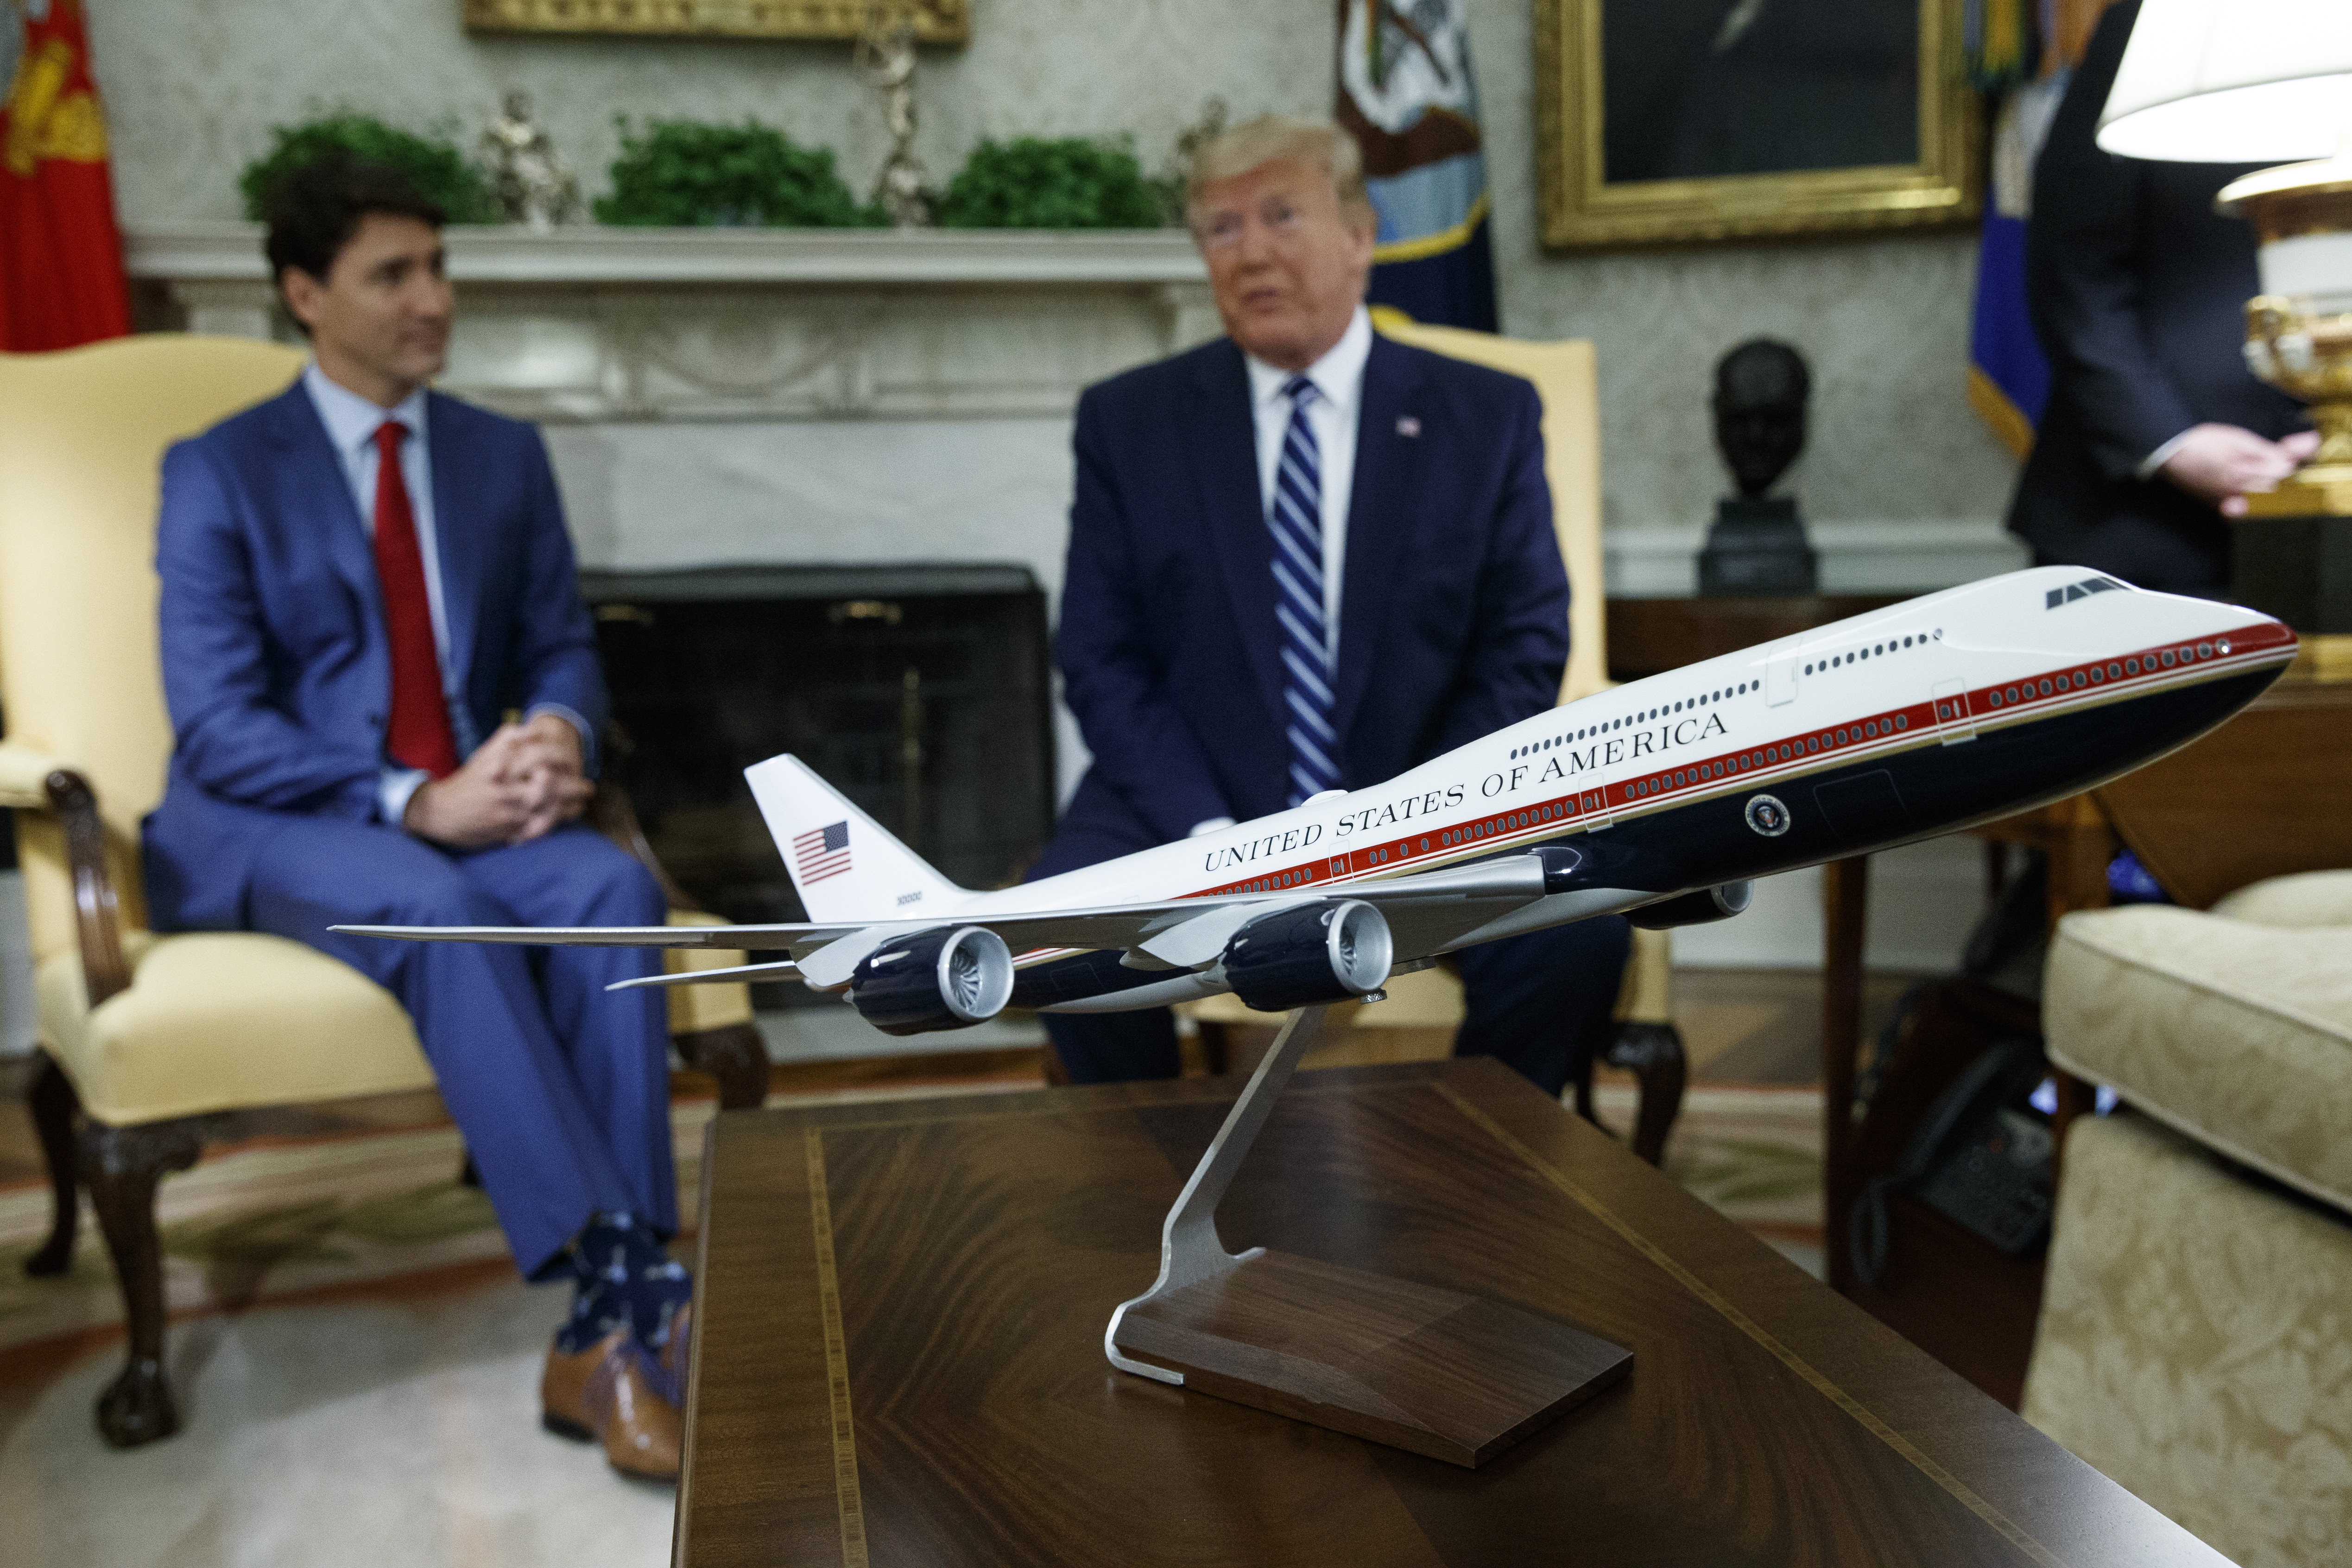 With new Air Force One planes still 